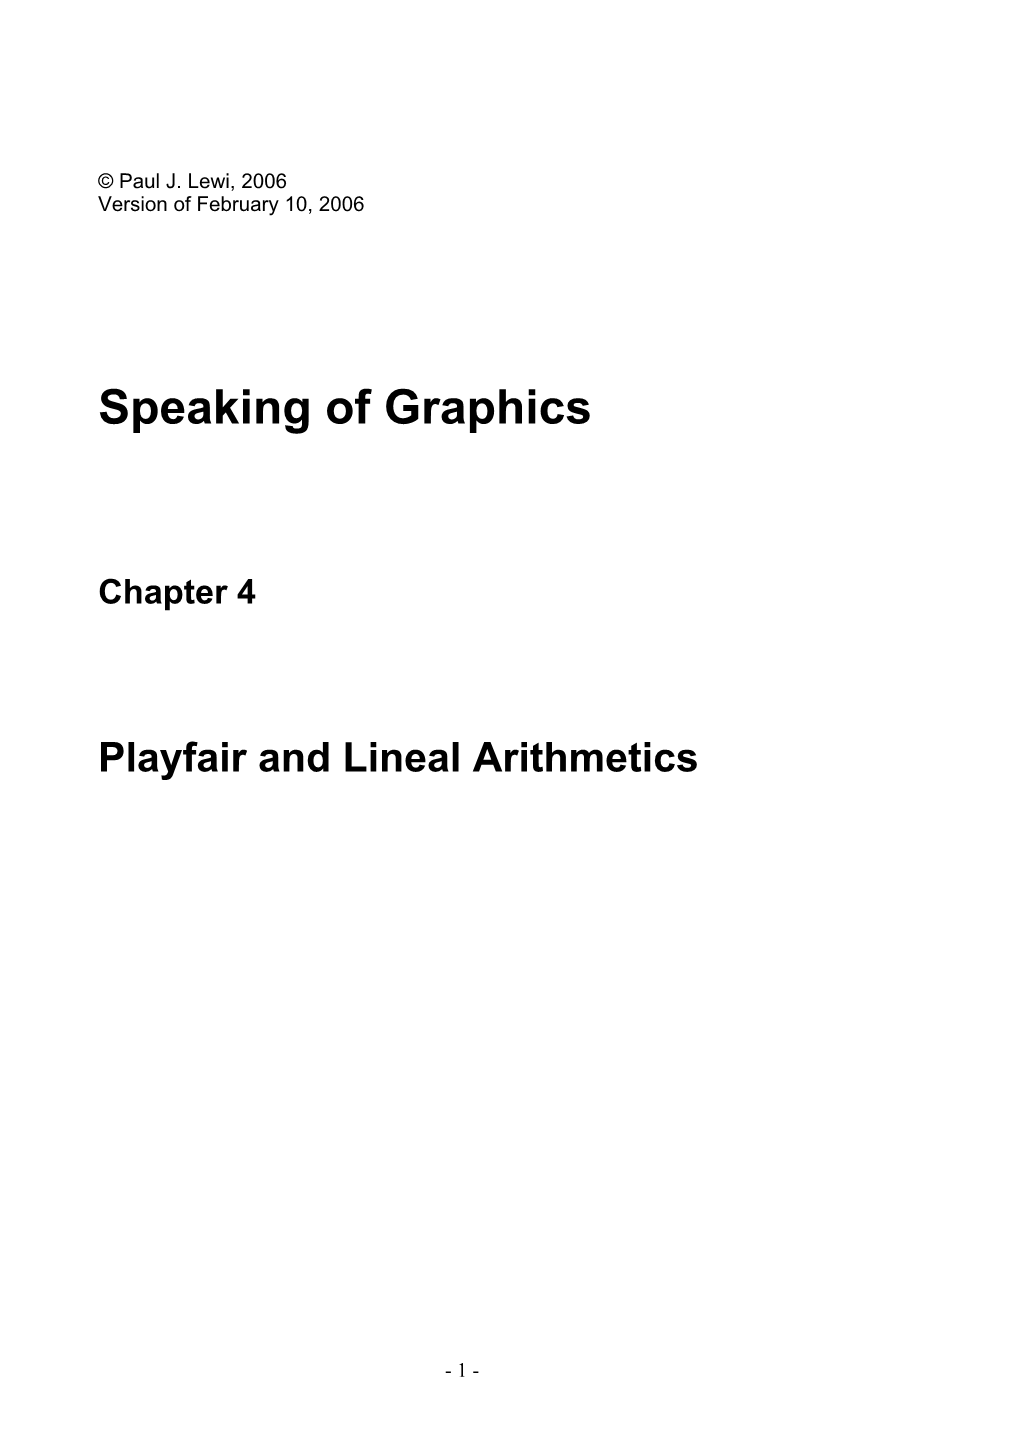 Chapter 4 Playfair and Lineal Arithmetics